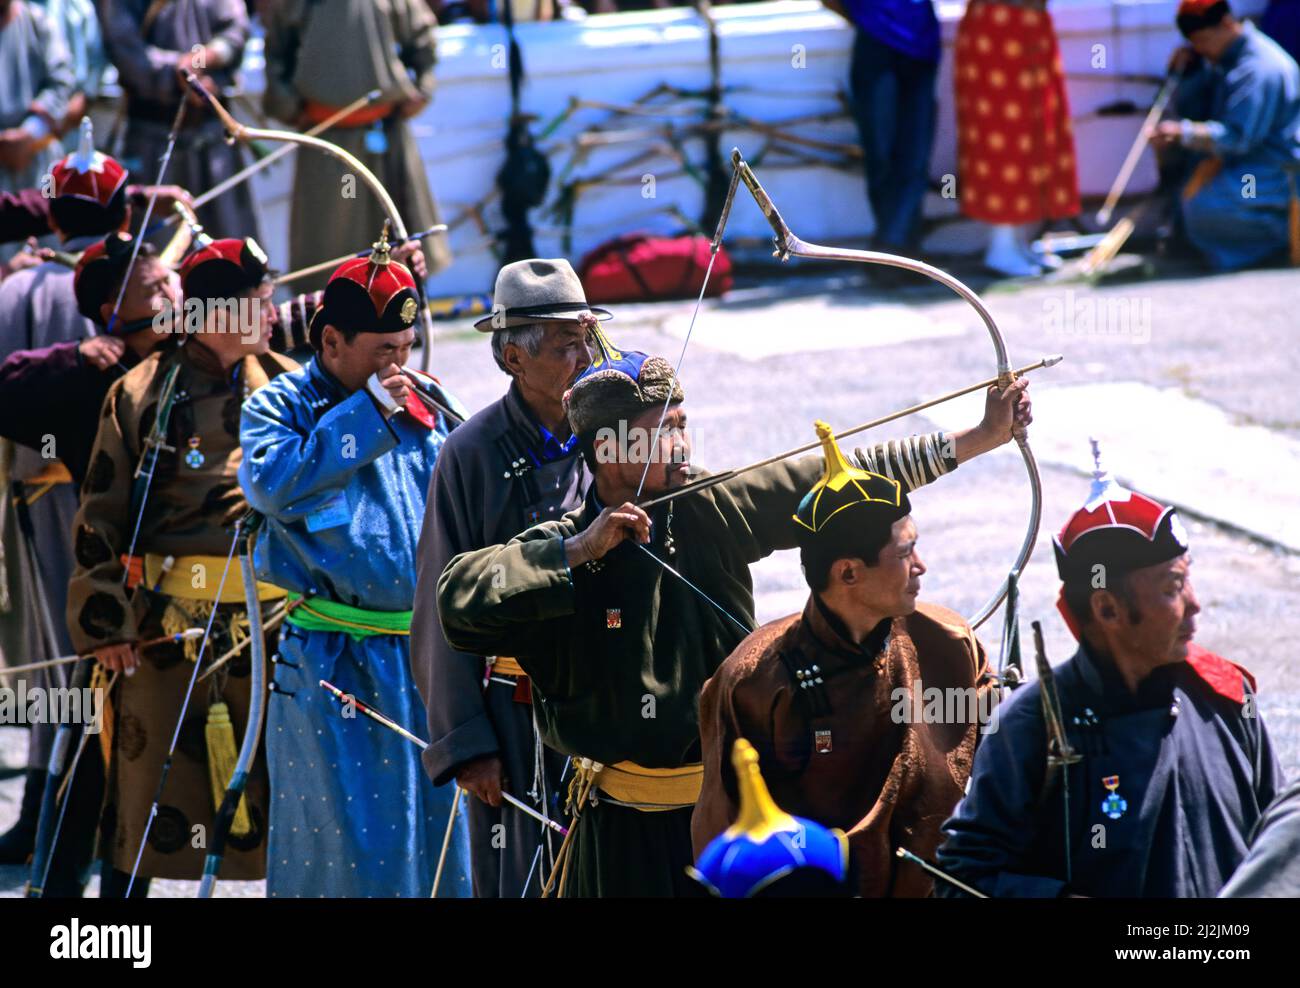 Ulaanbaatar stadium, Mongolia. Naadam is a traditional type of festival in Mongolia. Archery competition Stock Photo